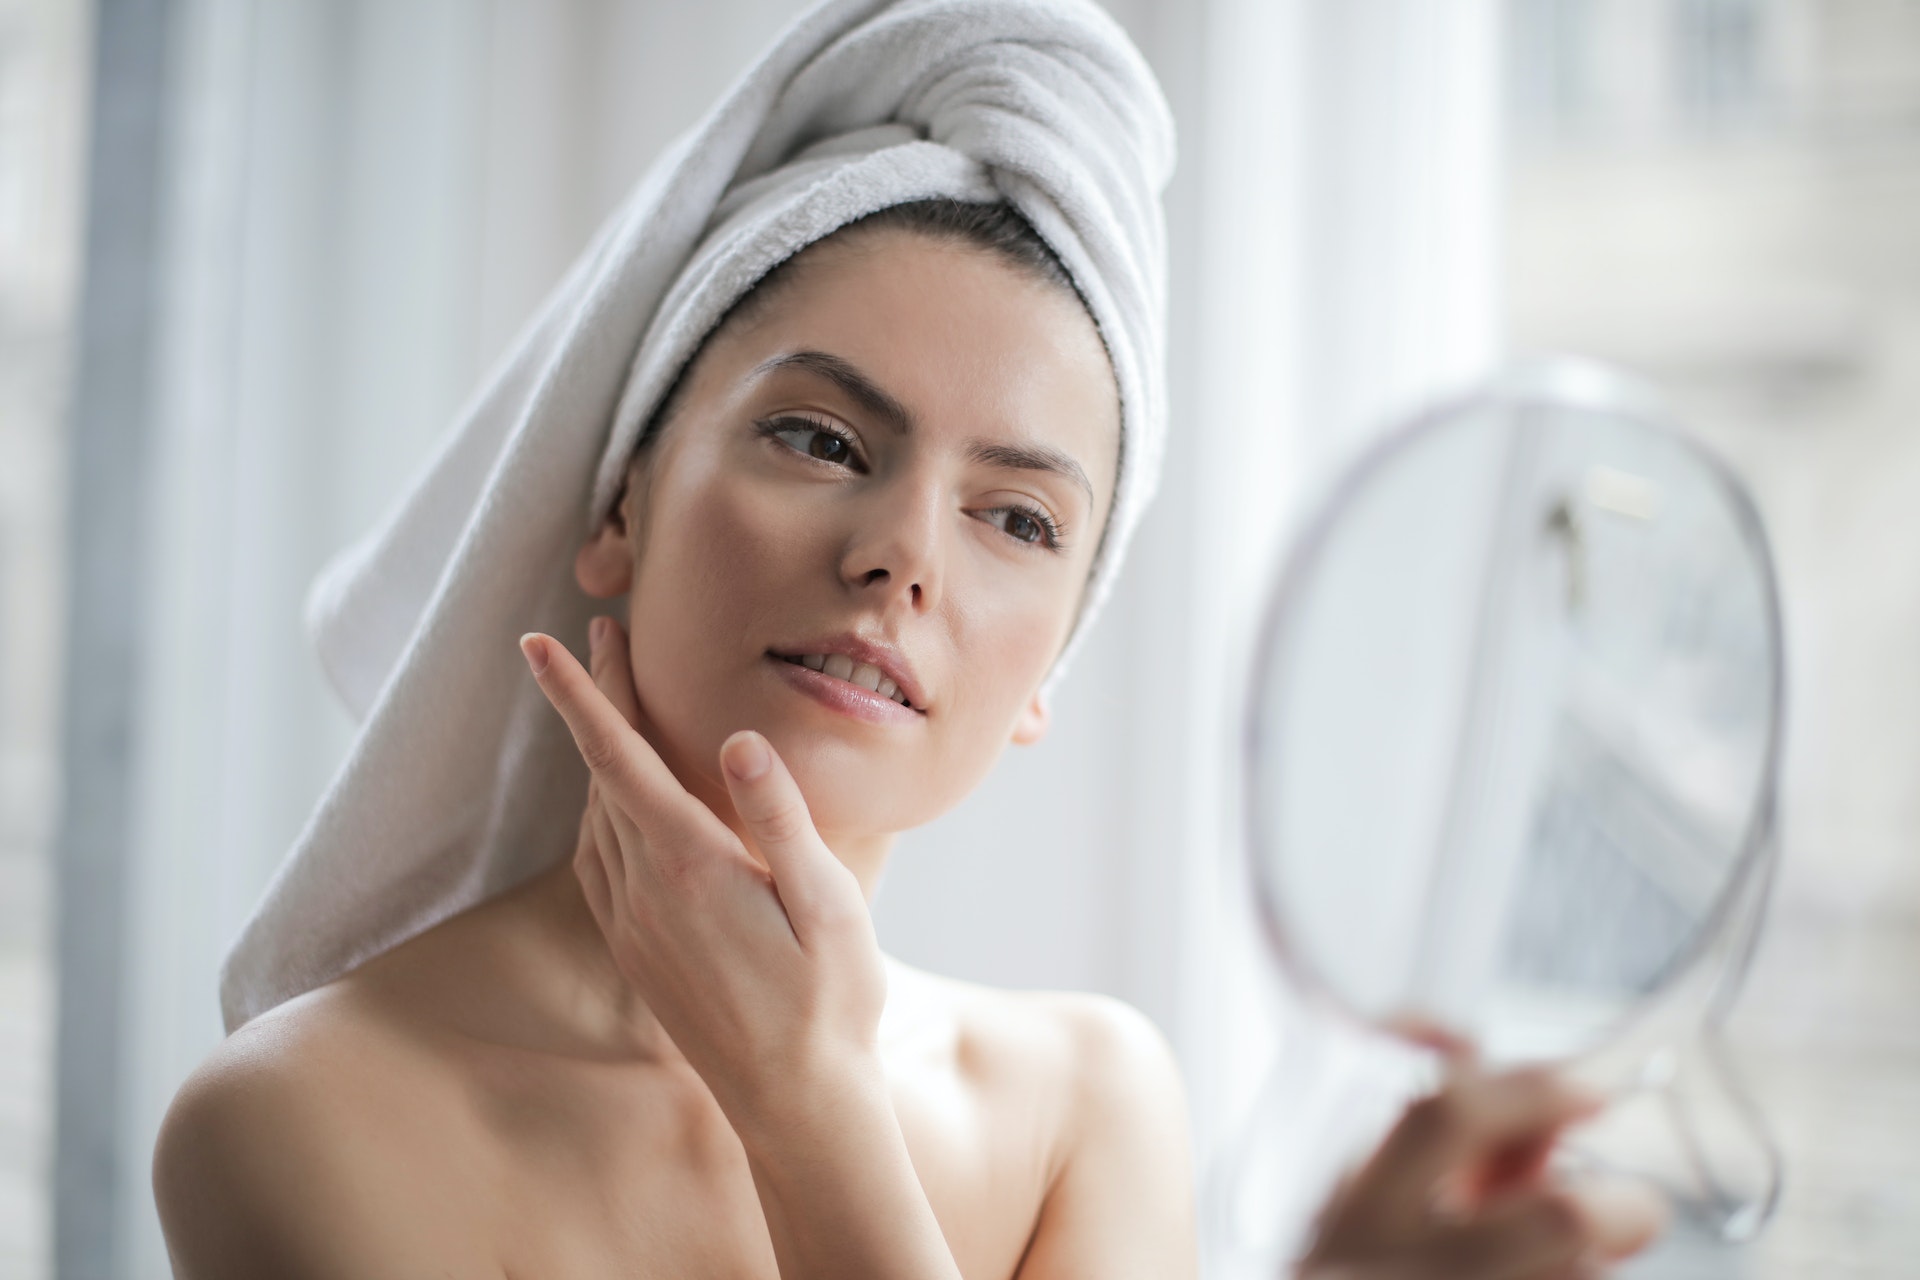 6 Ways to Maintain a Youthful Appearance